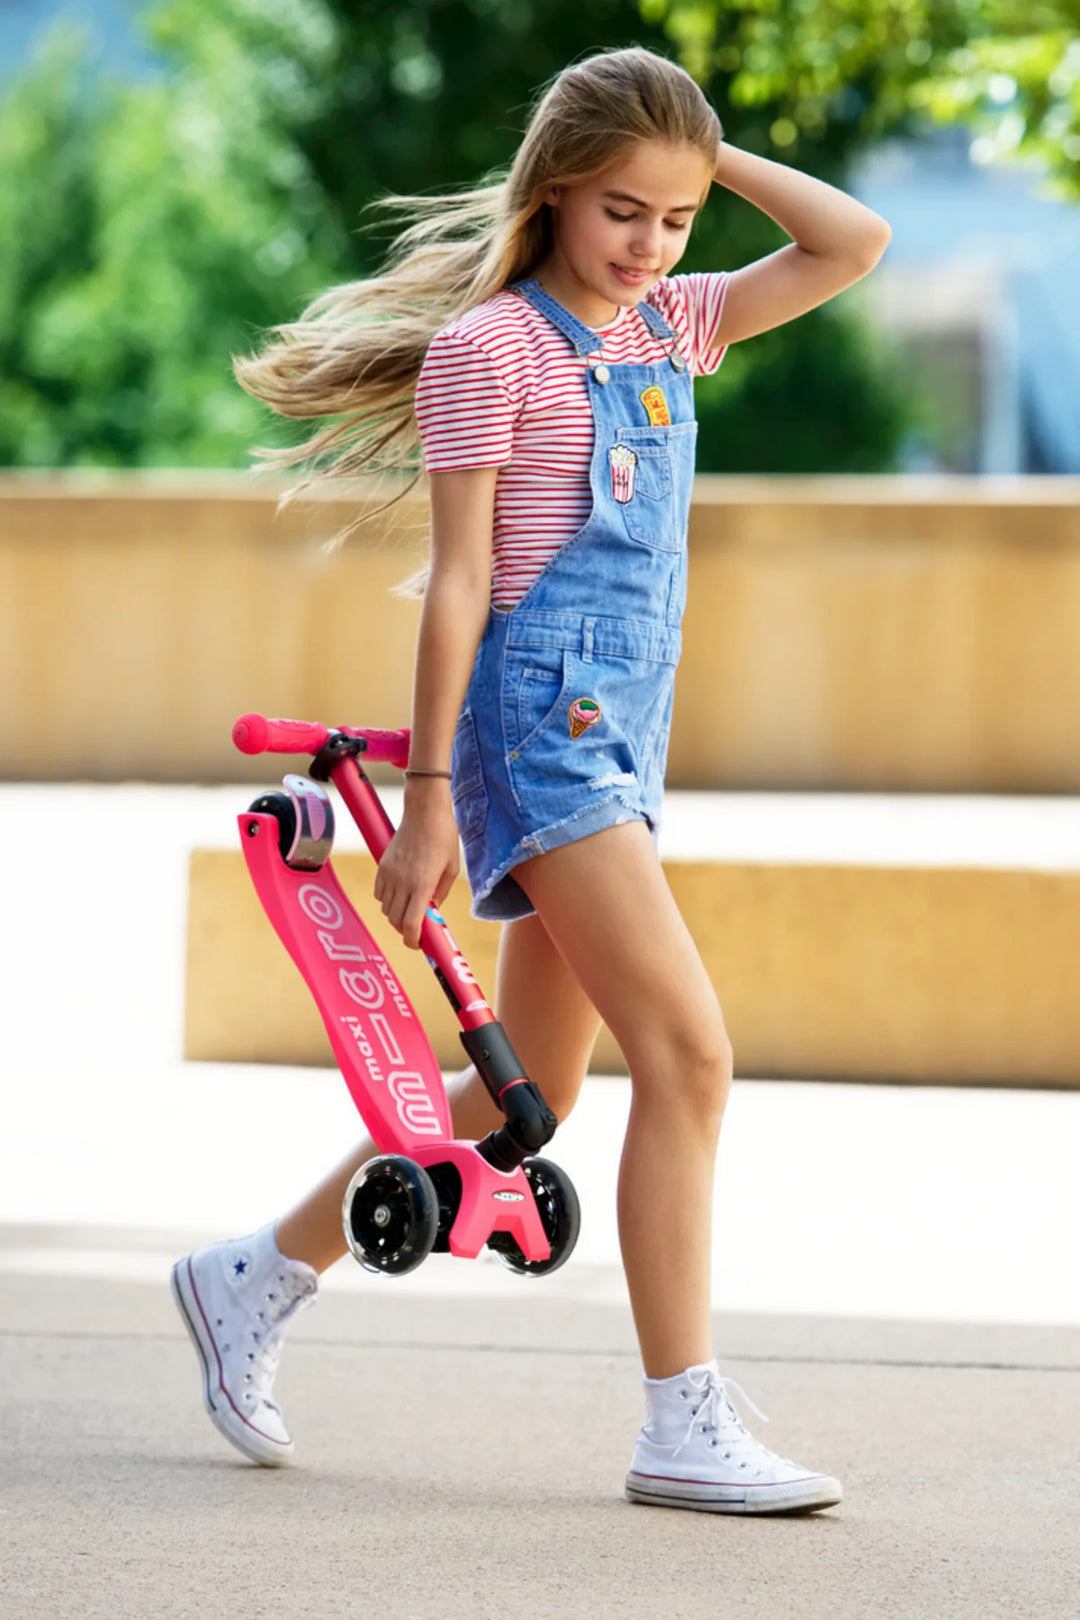 >Micro Kids Maxi Deluxe Foldable LED Scooter [more colors]